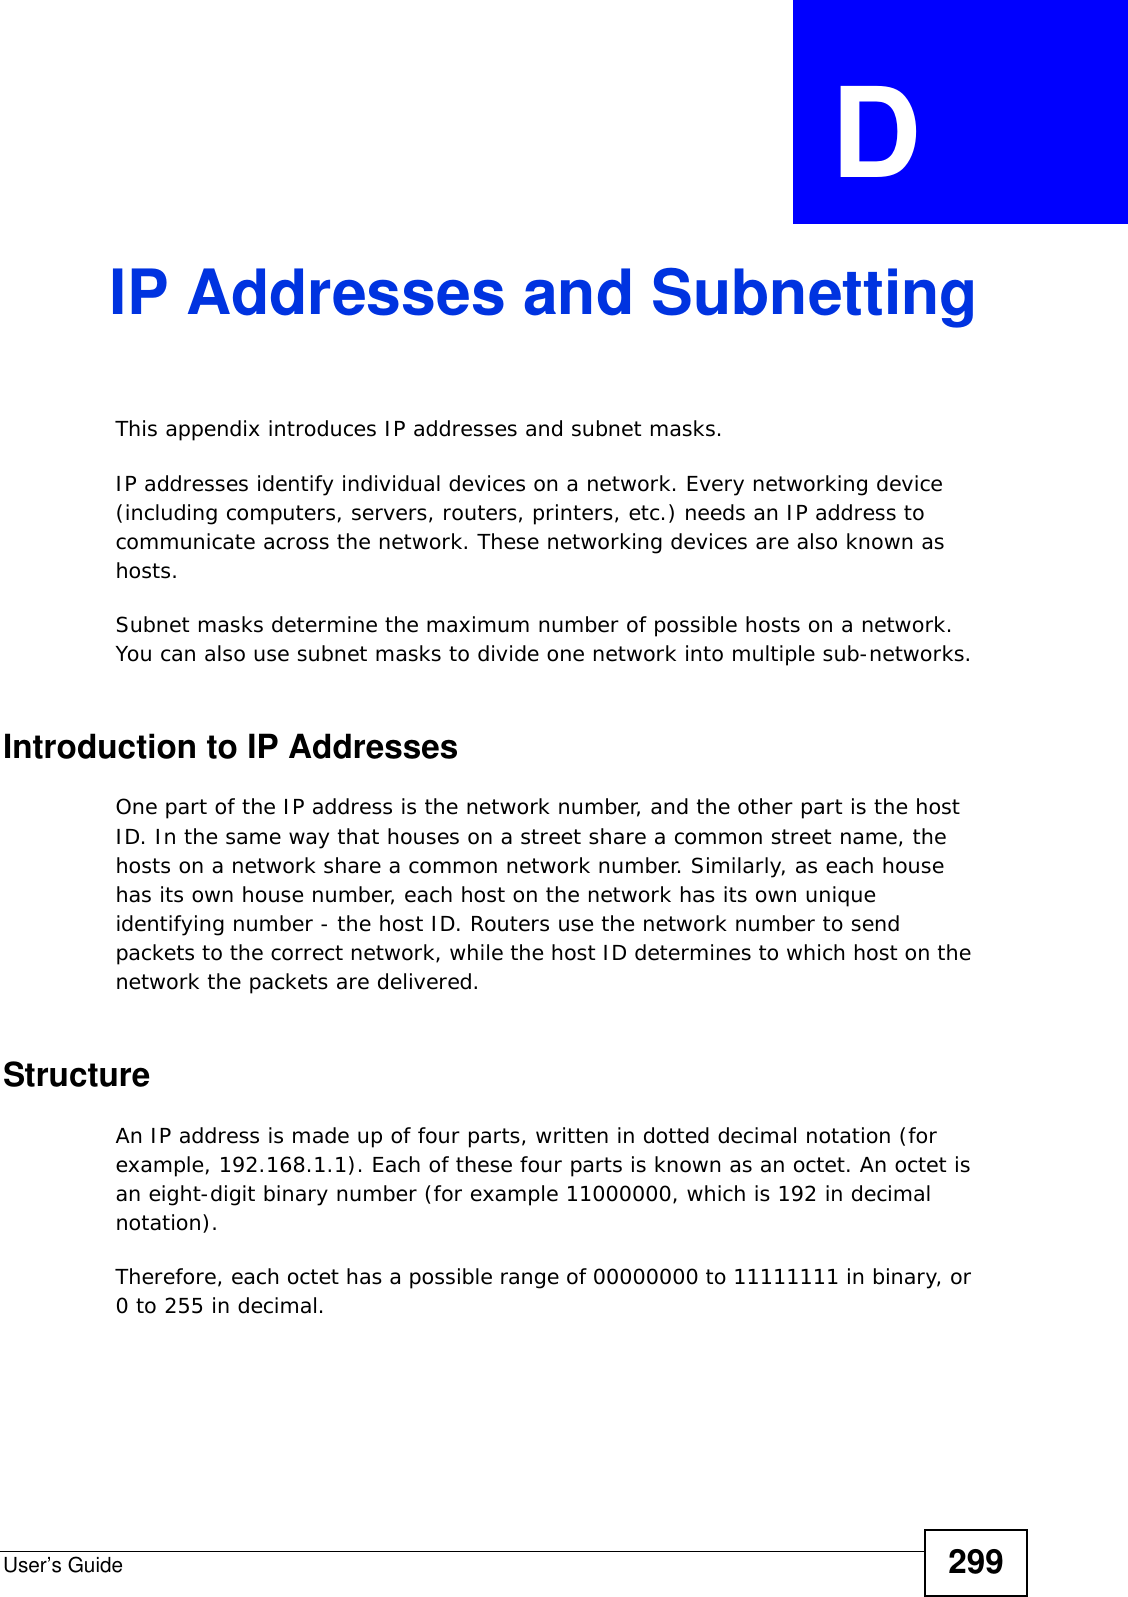 User’s Guide 299APPENDIX  D IP Addresses and SubnettingThis appendix introduces IP addresses and subnet masks. IP addresses identify individual devices on a network. Every networking device (including computers, servers, routers, printers, etc.) needs an IP address to communicate across the network. These networking devices are also known as hosts.Subnet masks determine the maximum number of possible hosts on a network. You can also use subnet masks to divide one network into multiple sub-networks.Introduction to IP AddressesOne part of the IP address is the network number, and the other part is the host ID. In the same way that houses on a street share a common street name, the hosts on a network share a common network number. Similarly, as each house has its own house number, each host on the network has its own unique identifying number - the host ID. Routers use the network number to send packets to the correct network, while the host ID determines to which host on the network the packets are delivered.StructureAn IP address is made up of four parts, written in dotted decimal notation (for example, 192.168.1.1). Each of these four parts is known as an octet. An octet is an eight-digit binary number (for example 11000000, which is 192 in decimal notation). Therefore, each octet has a possible range of 00000000 to 11111111 in binary, or 0 to 255 in decimal.